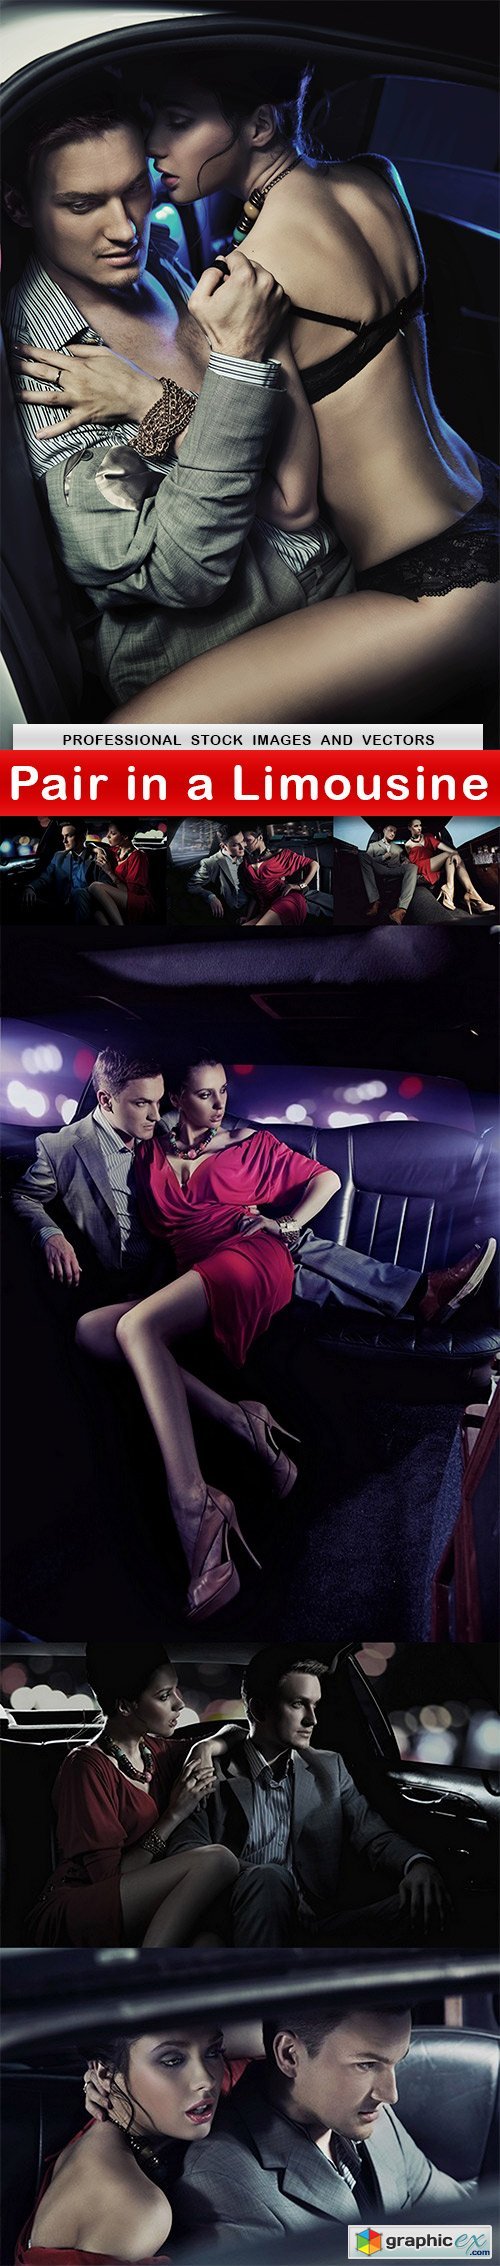 Pair in a Limousine - 7 UHQ JPEG